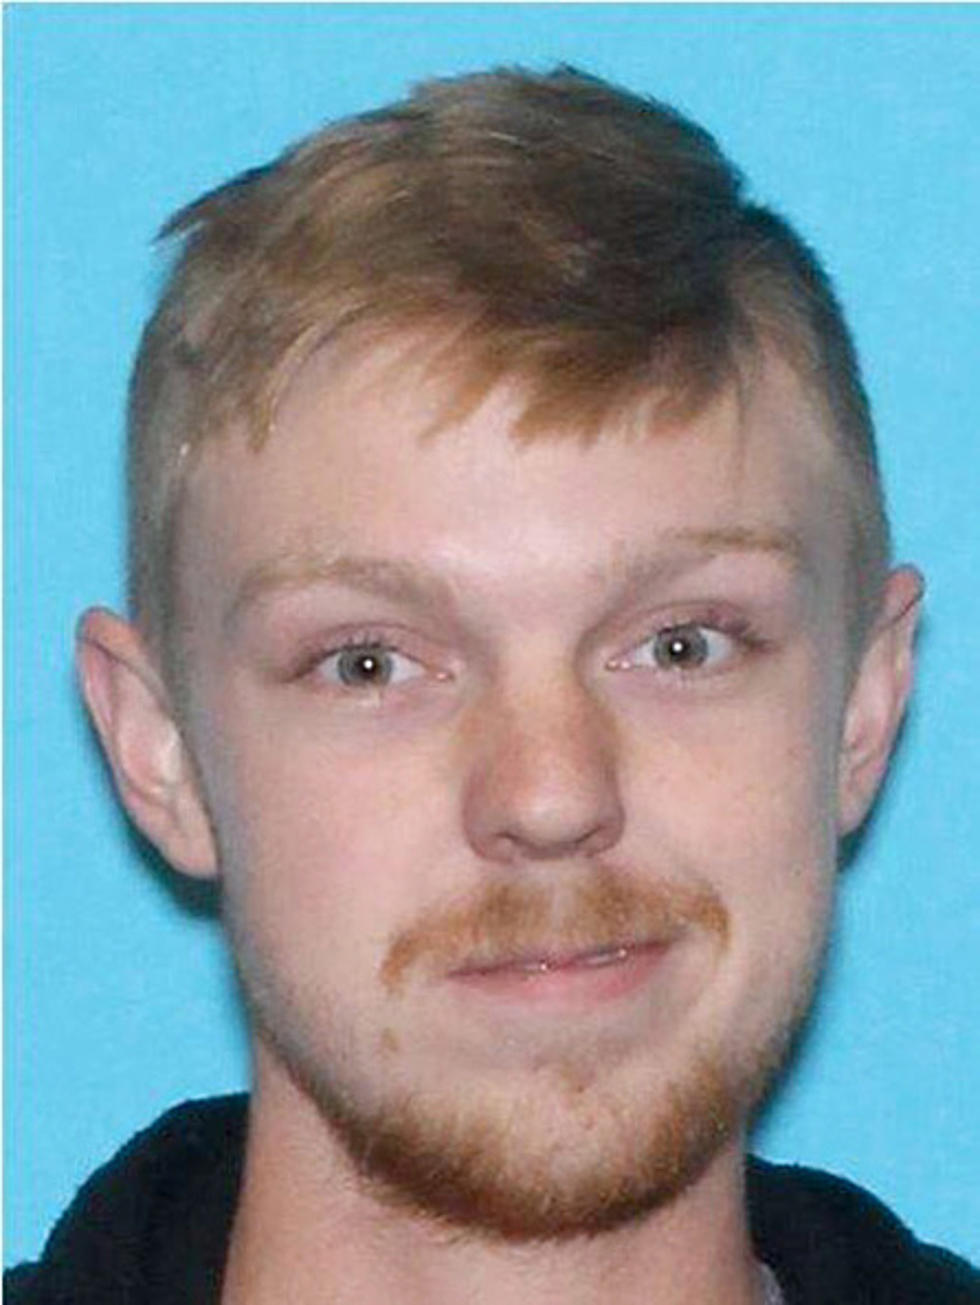 &#8216;Affluenza&#8217; Teen May Delay Deportation with Human Rights Law